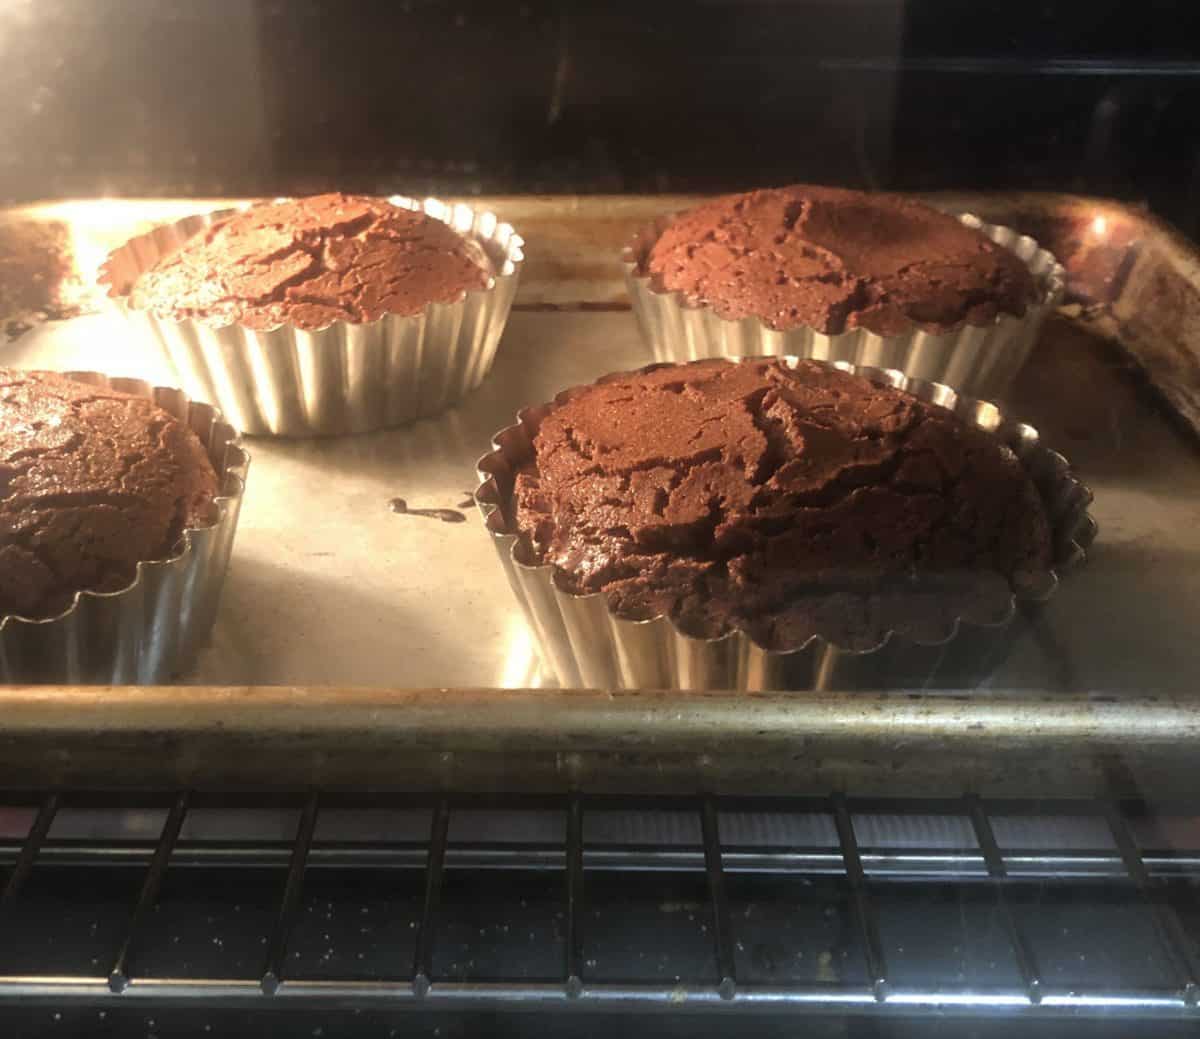 https://storables.com/wp-content/uploads/2023/07/how-long-to-bake-cake-in-toaster-oven-1690693274.jpeg